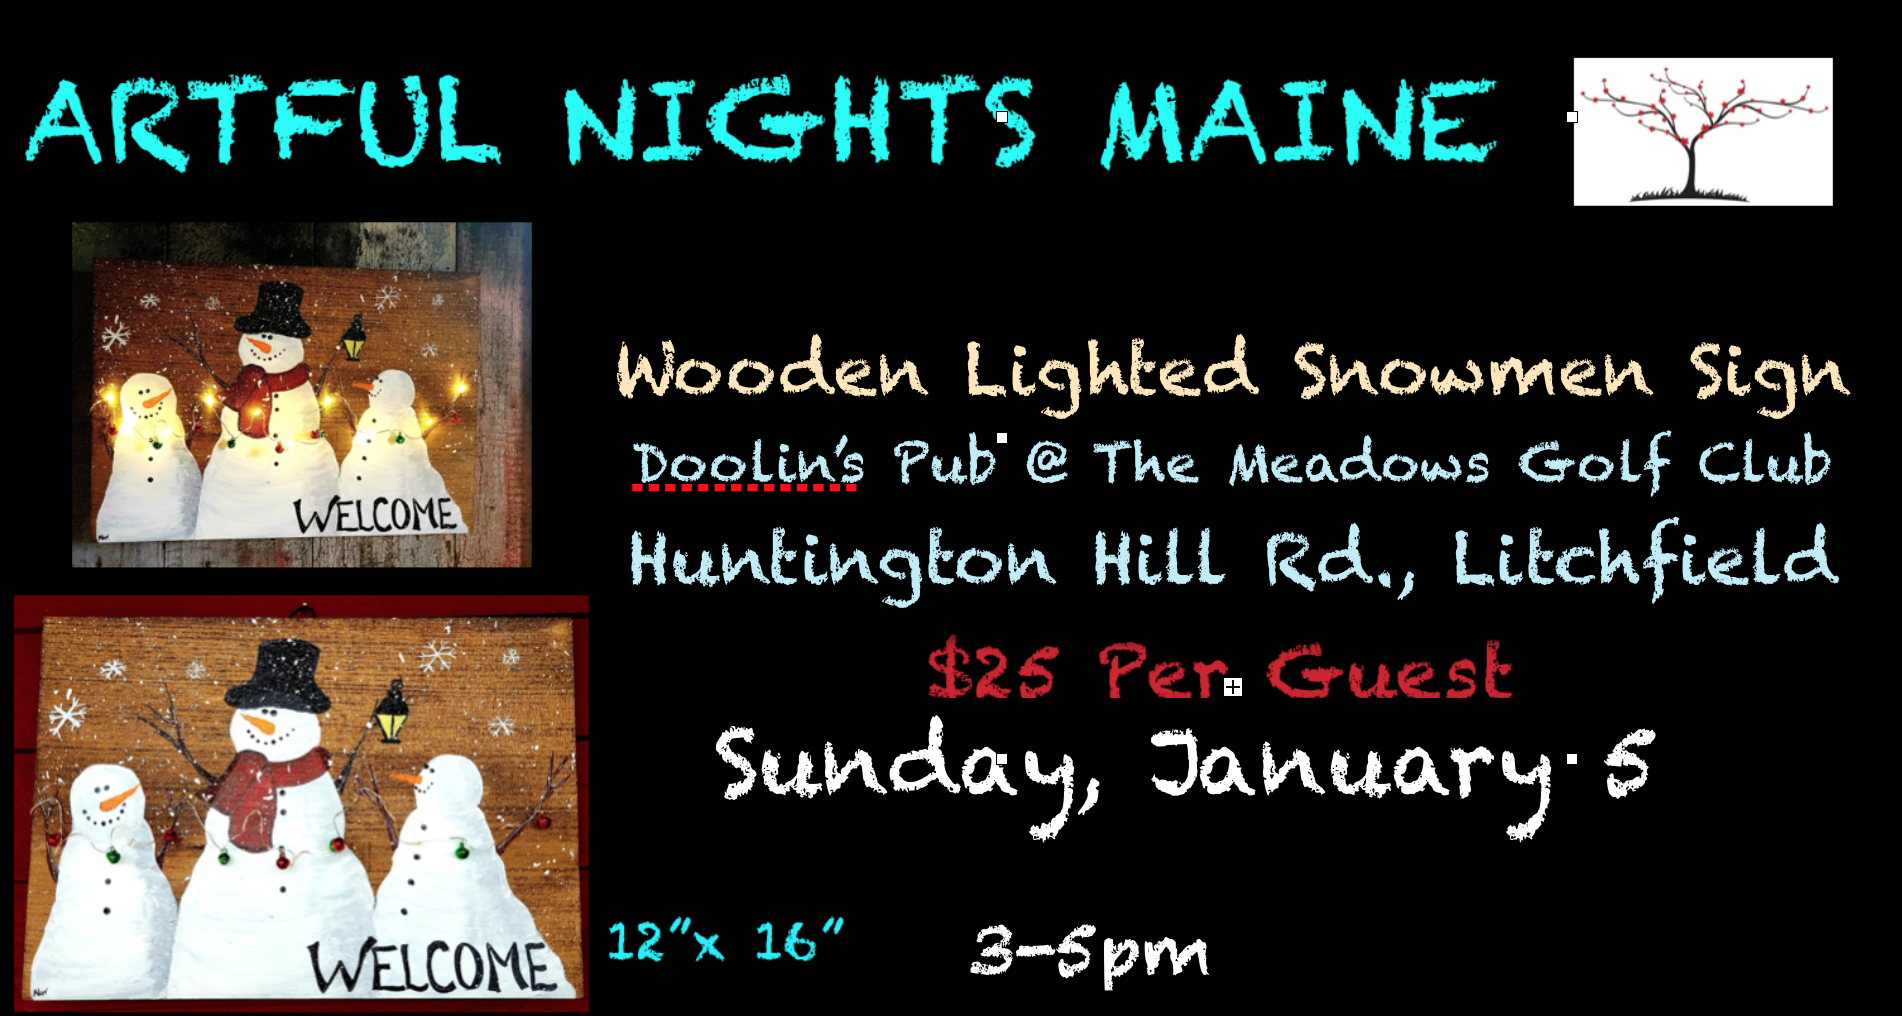 Wooden Lighted Snowmen Sign Doolin's Pub at The Meadows Golf Club